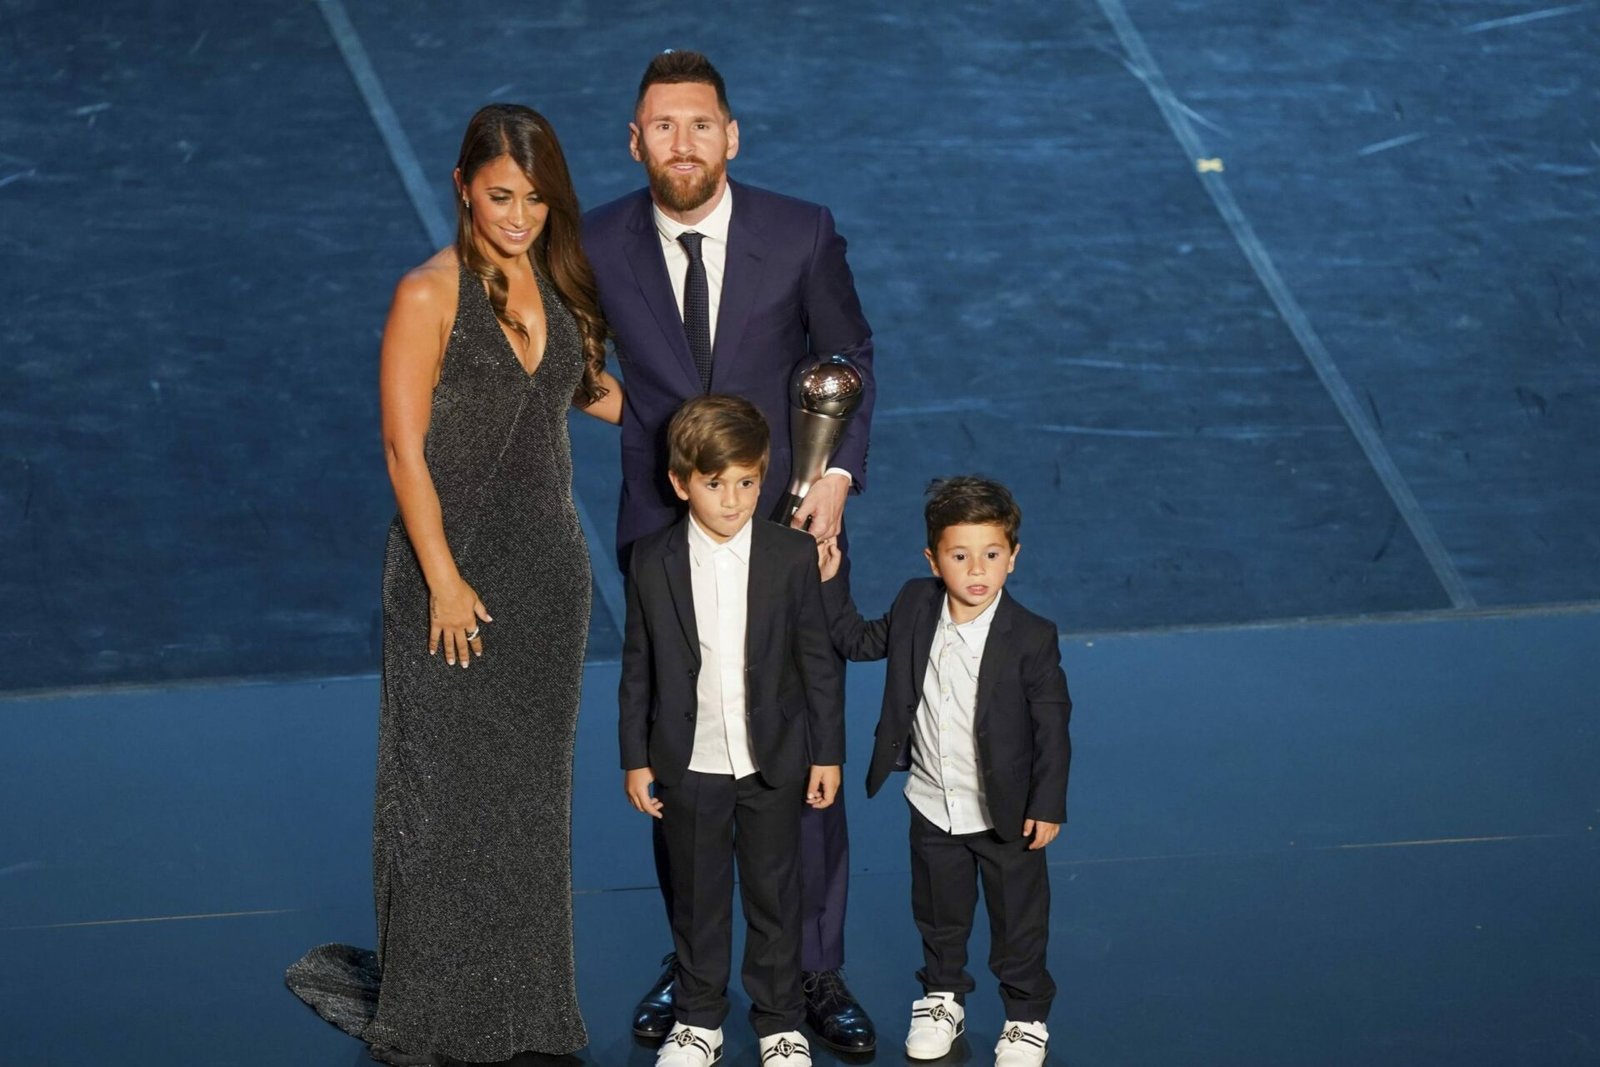 Messi to return to Camp Nou? Speculations rise as he arrives at Barcelona with 15 suitcases along with family